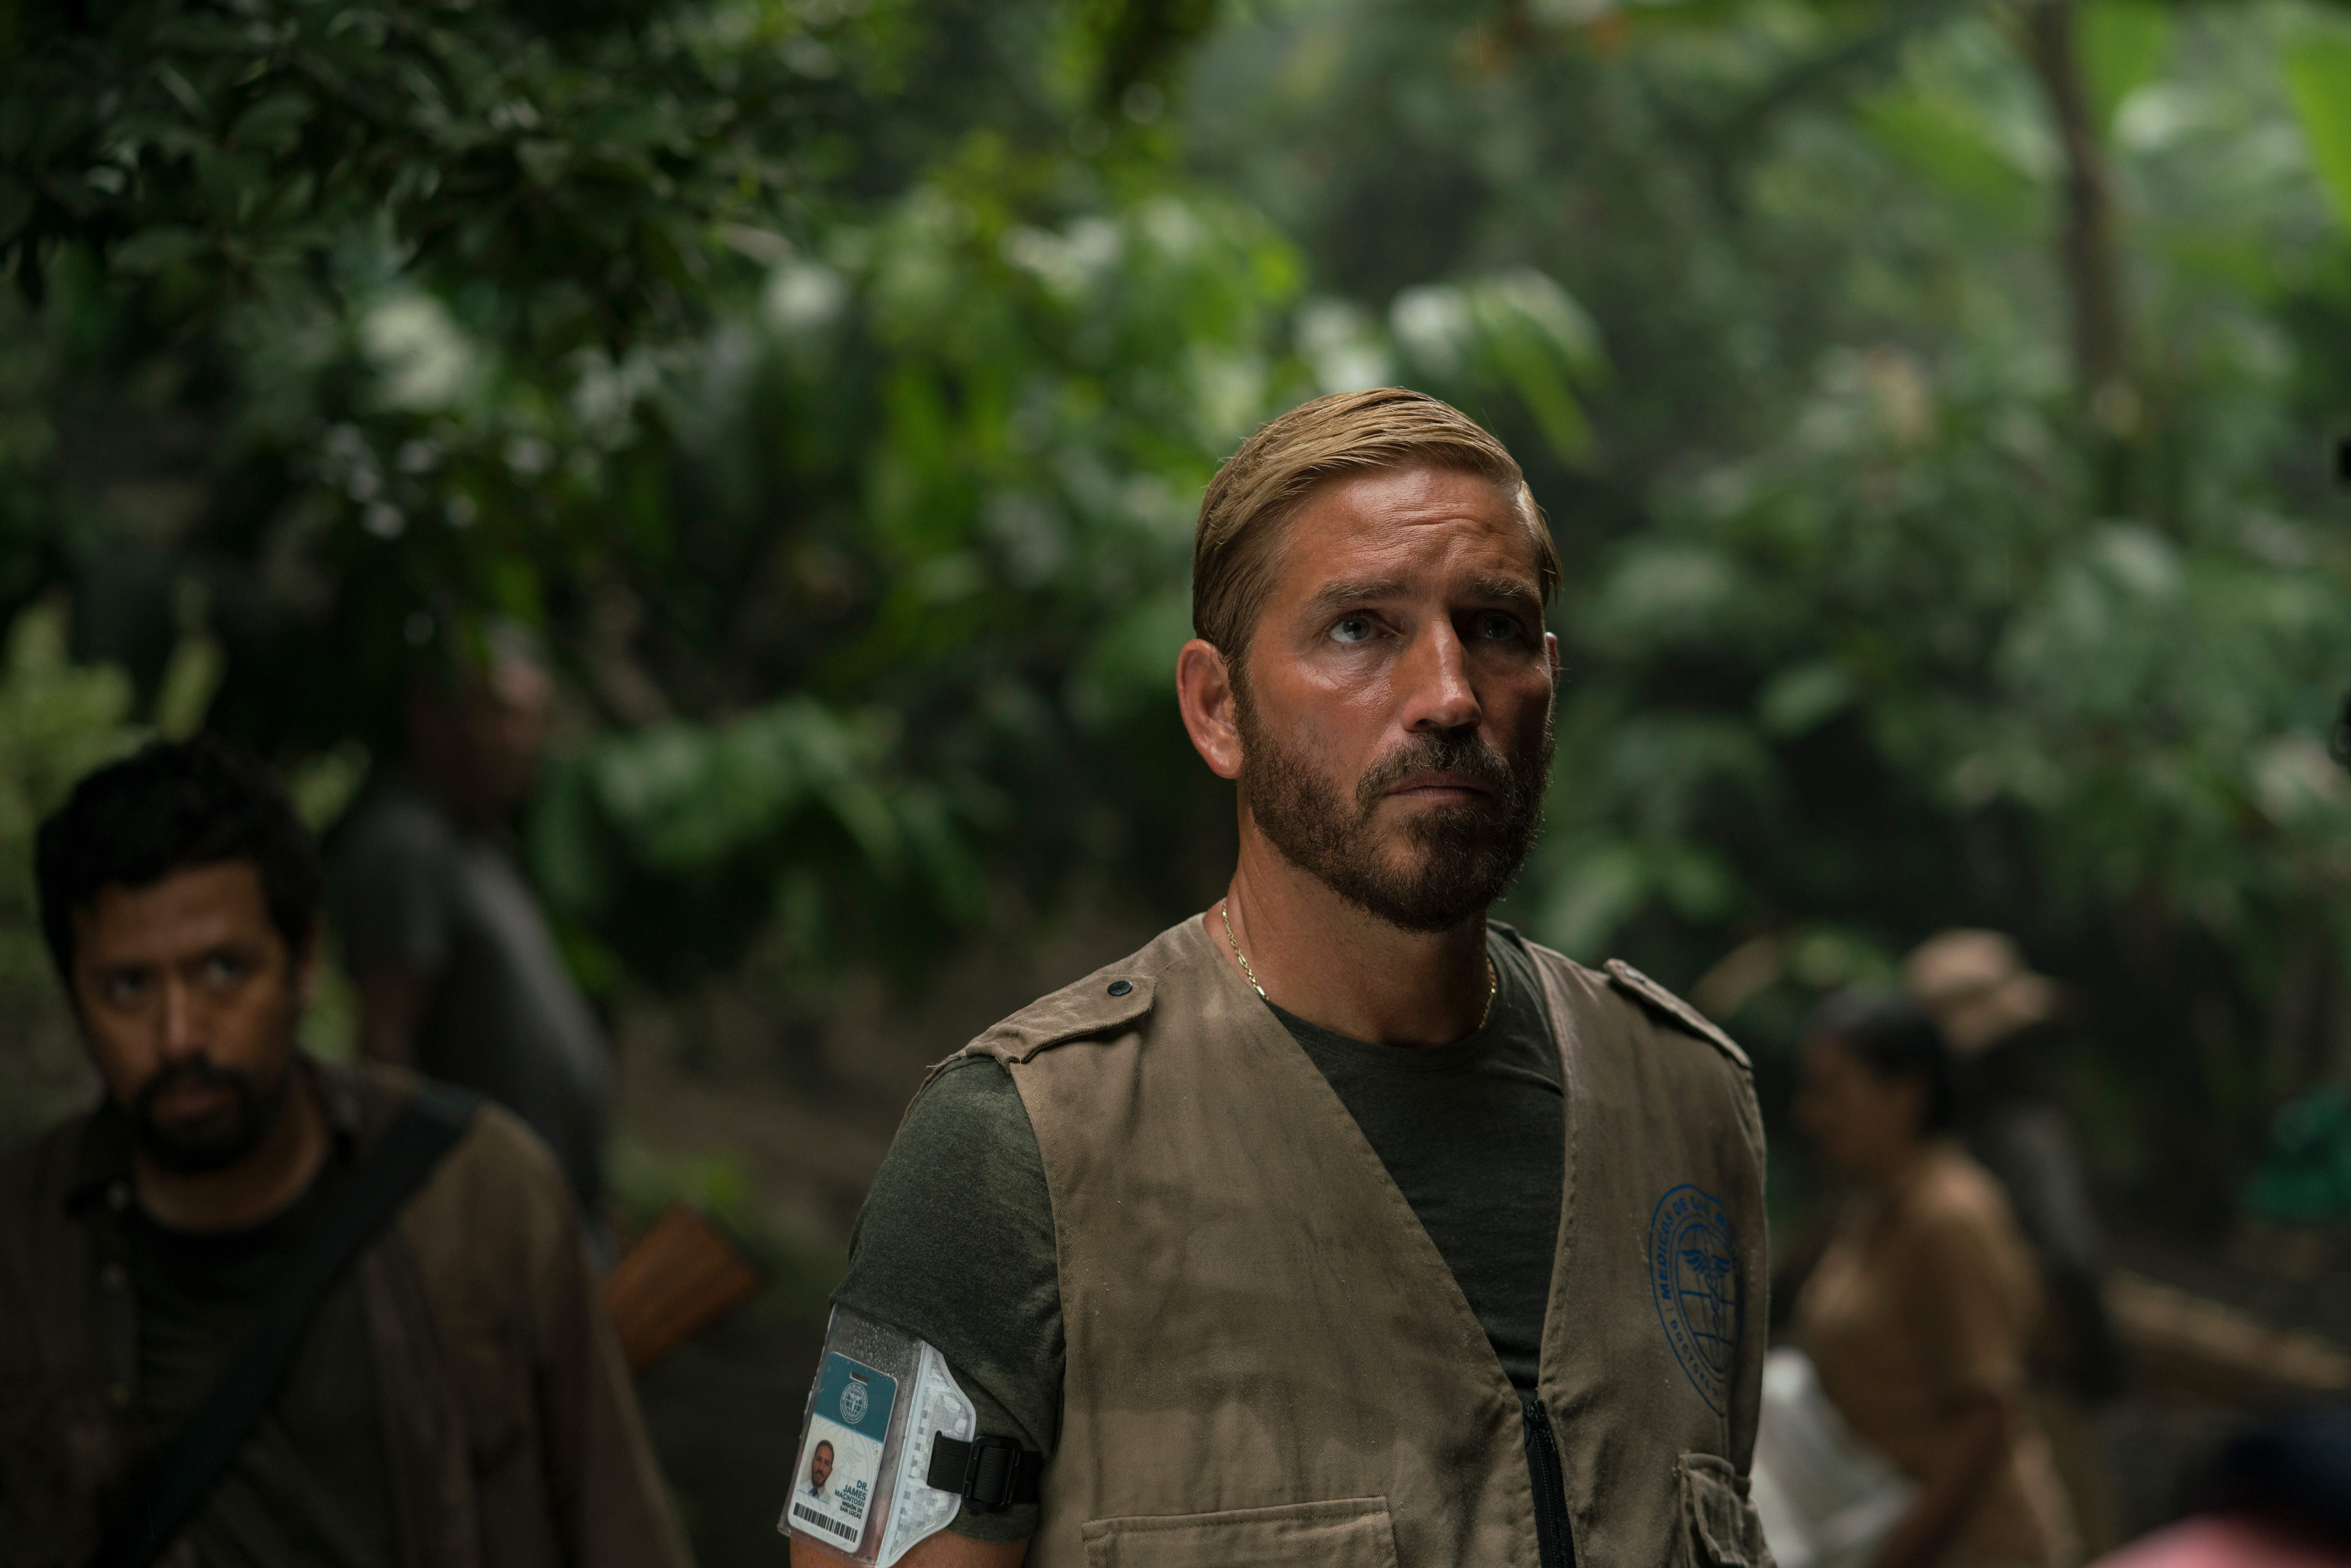 Jim Caviezel in Sound of Freedom wearing a vest in the jungle